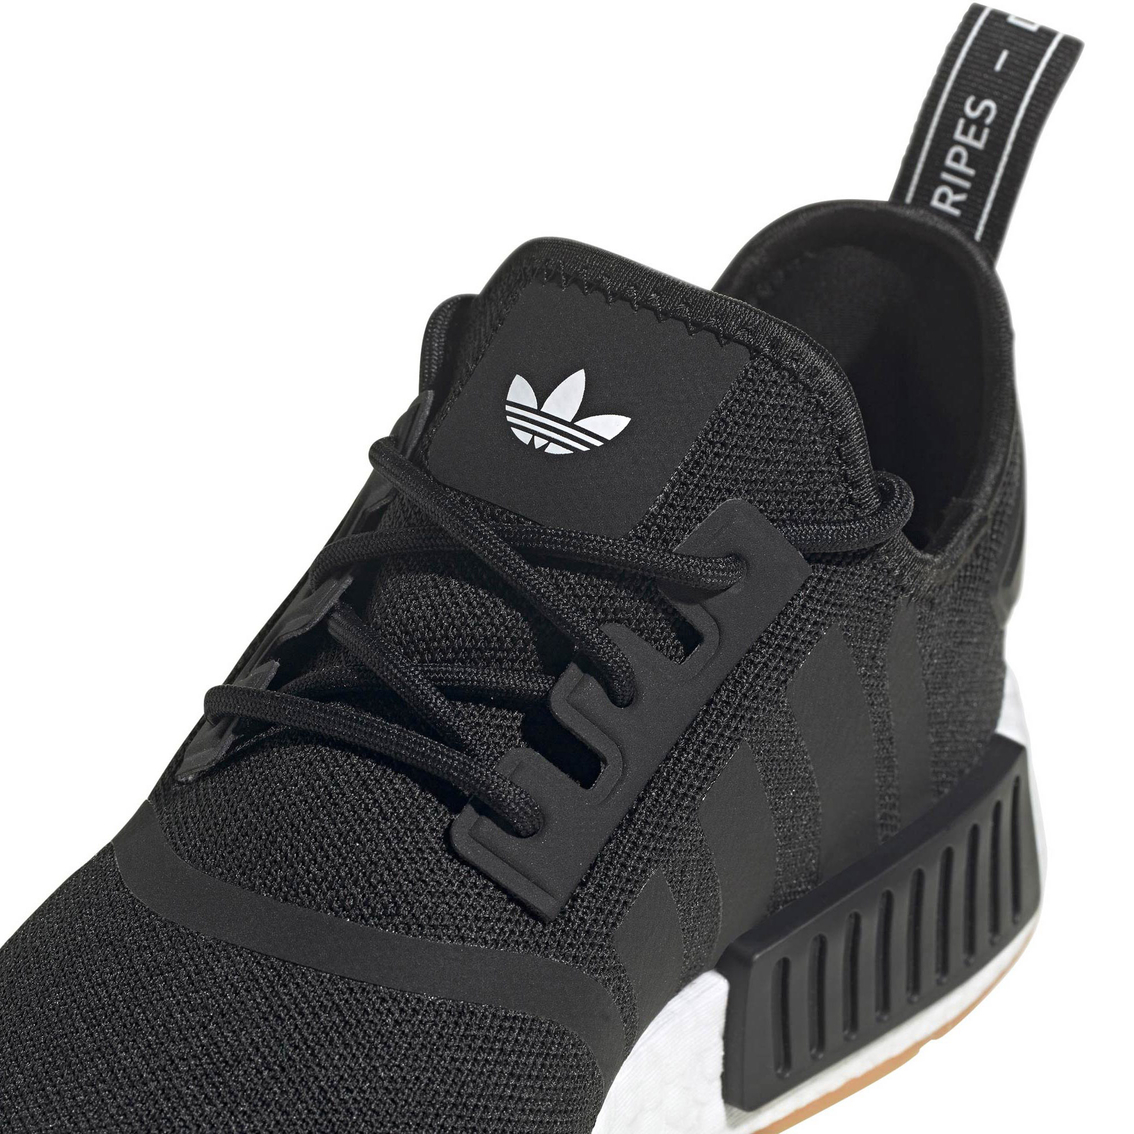 adidas Men's NMD R1 Sneakers - Image 6 of 8